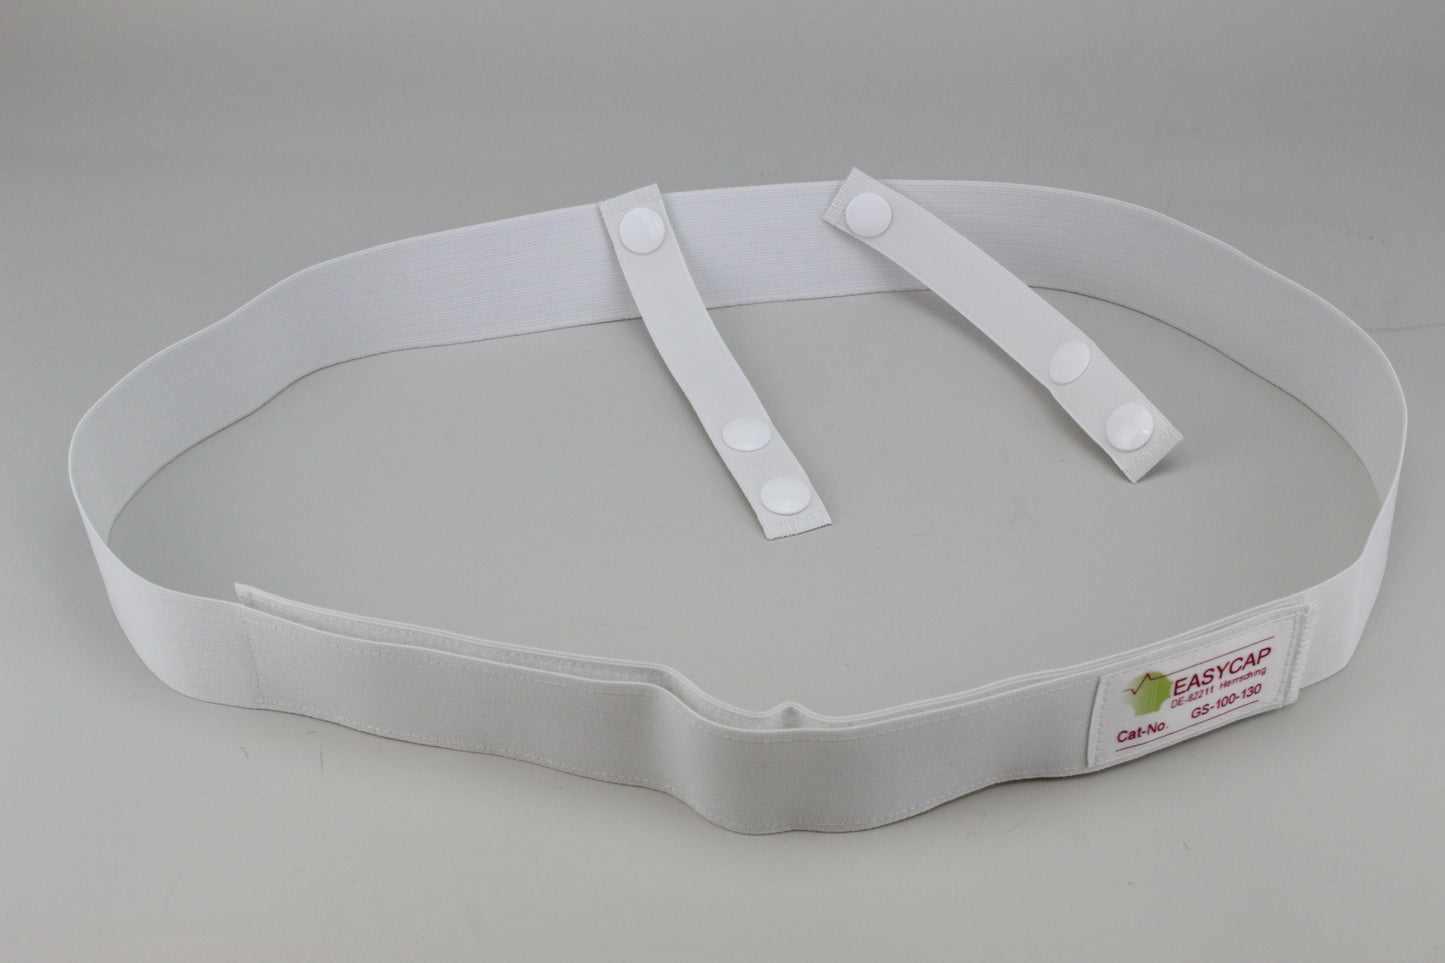 Chestbelt for Securing EEG caps